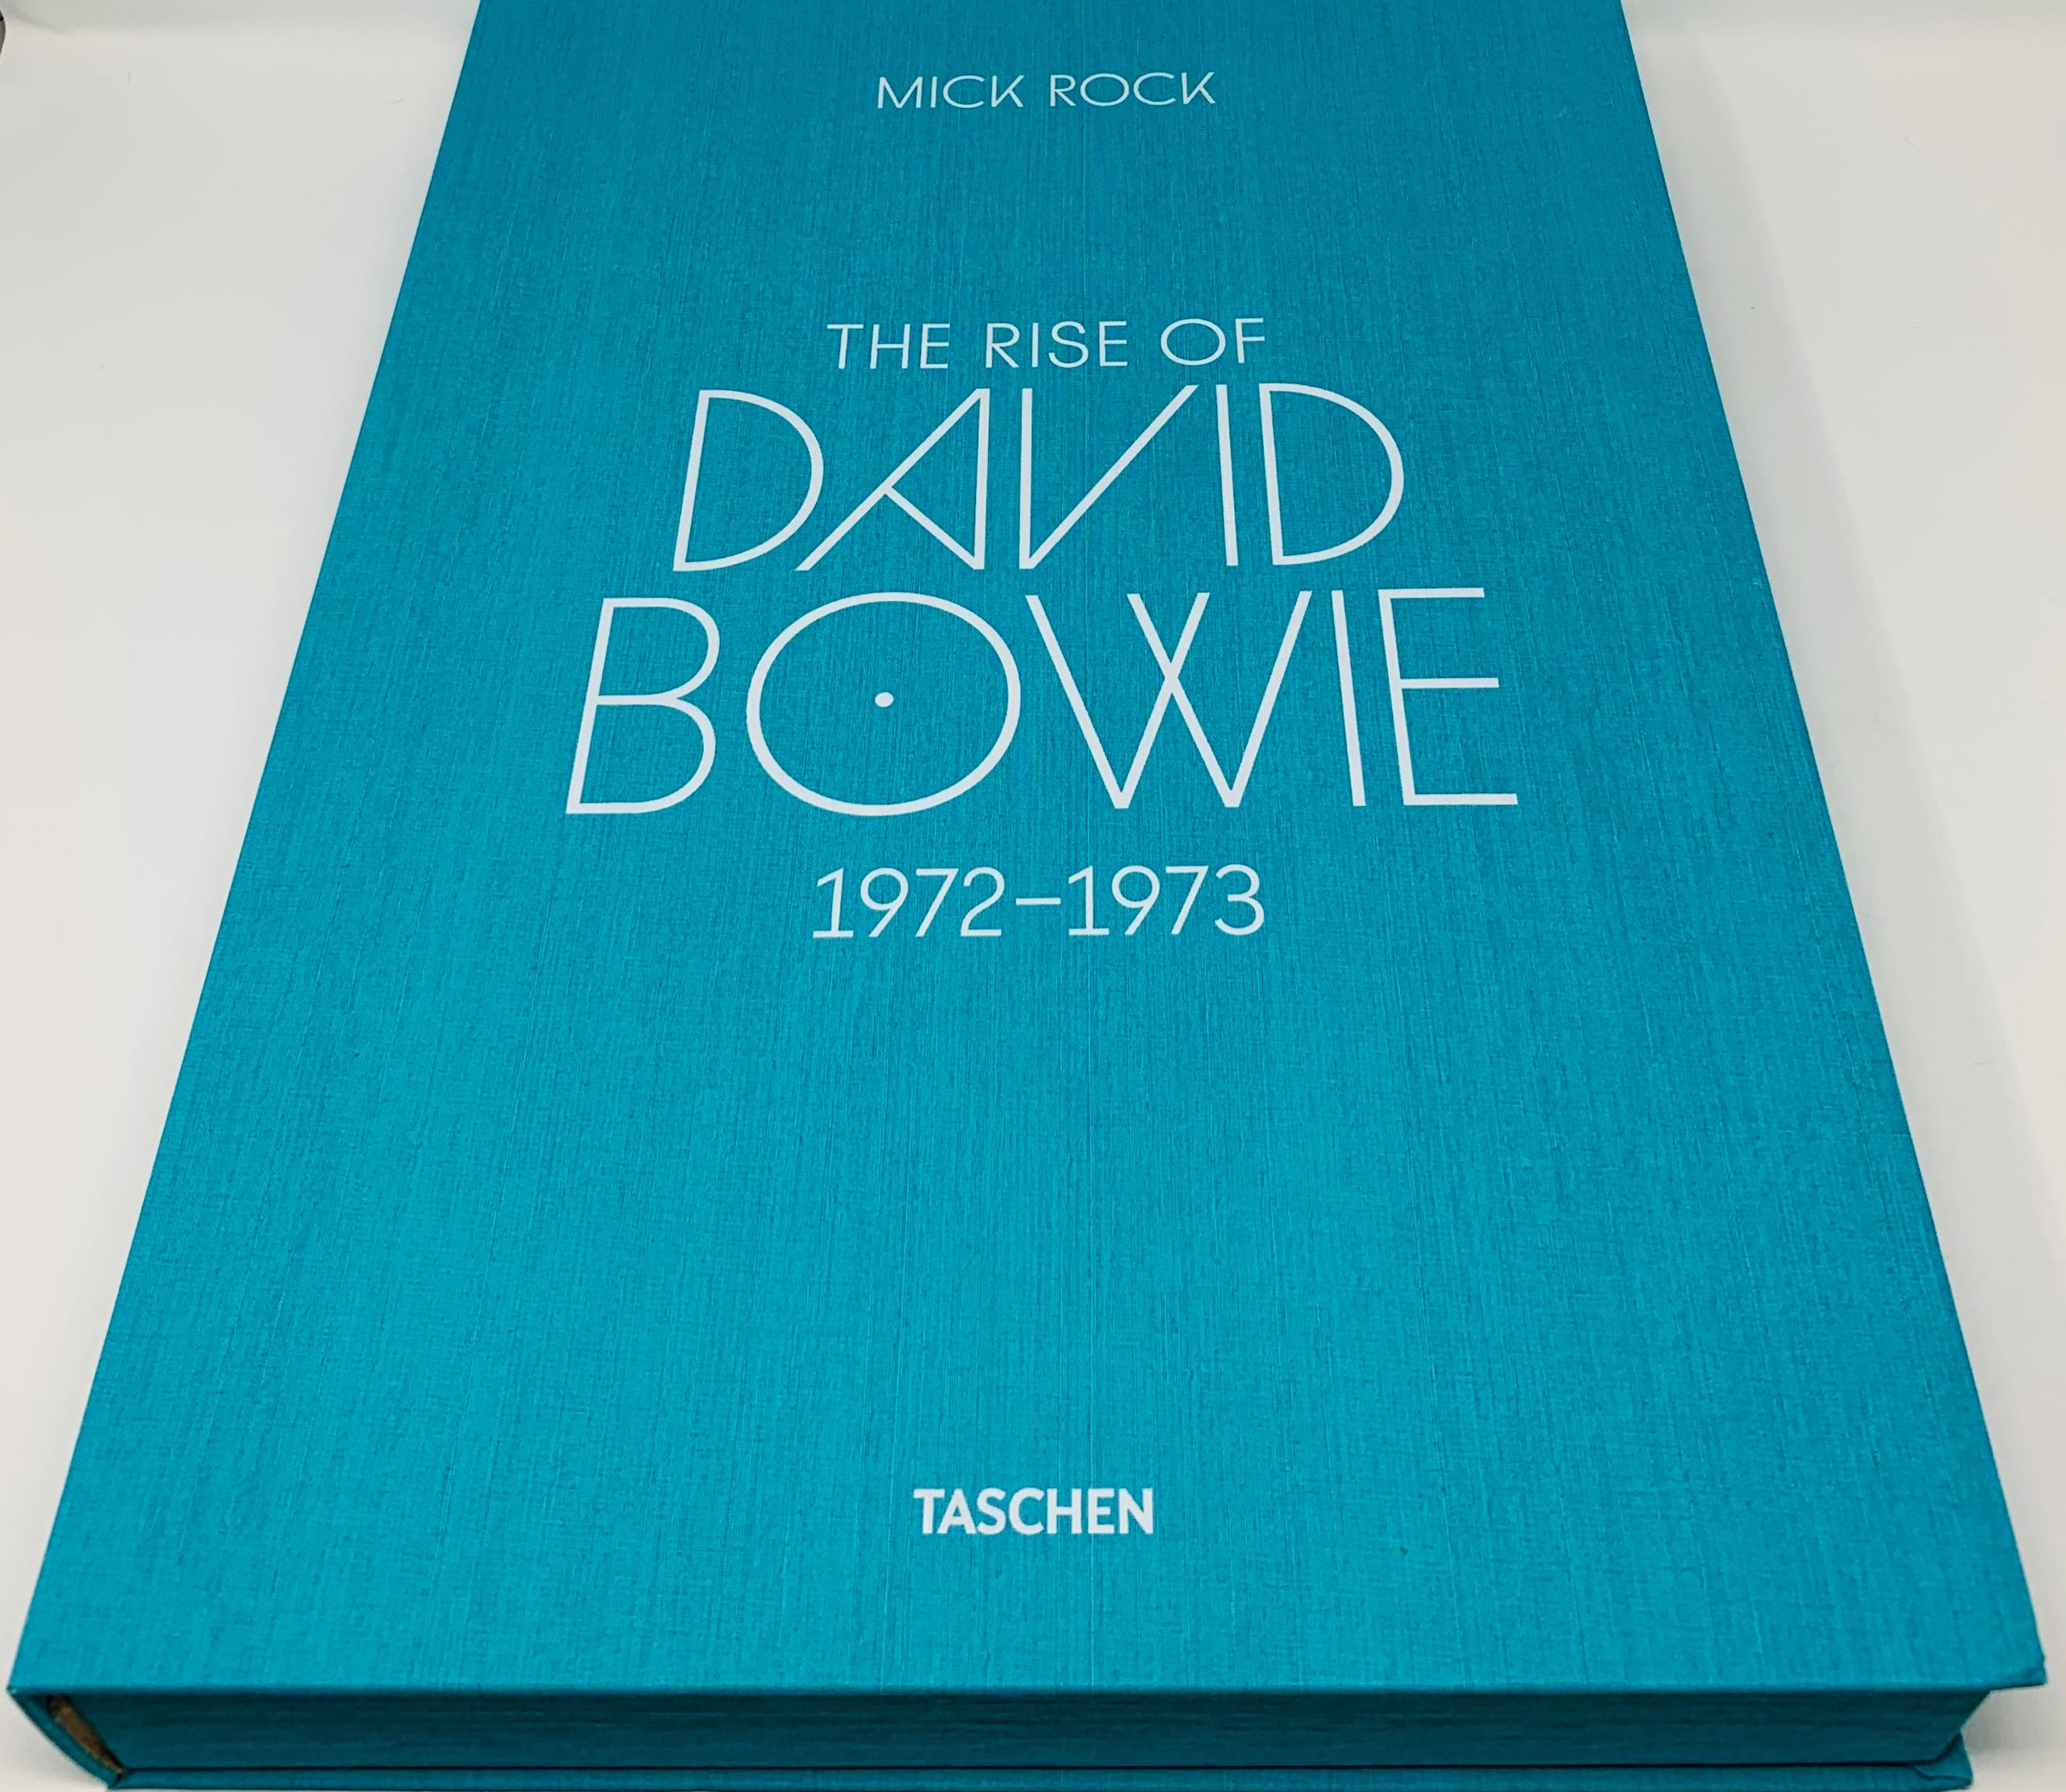 DAVID BOWIE ROCK MICK B.  The Rise of David Bowie   Limited